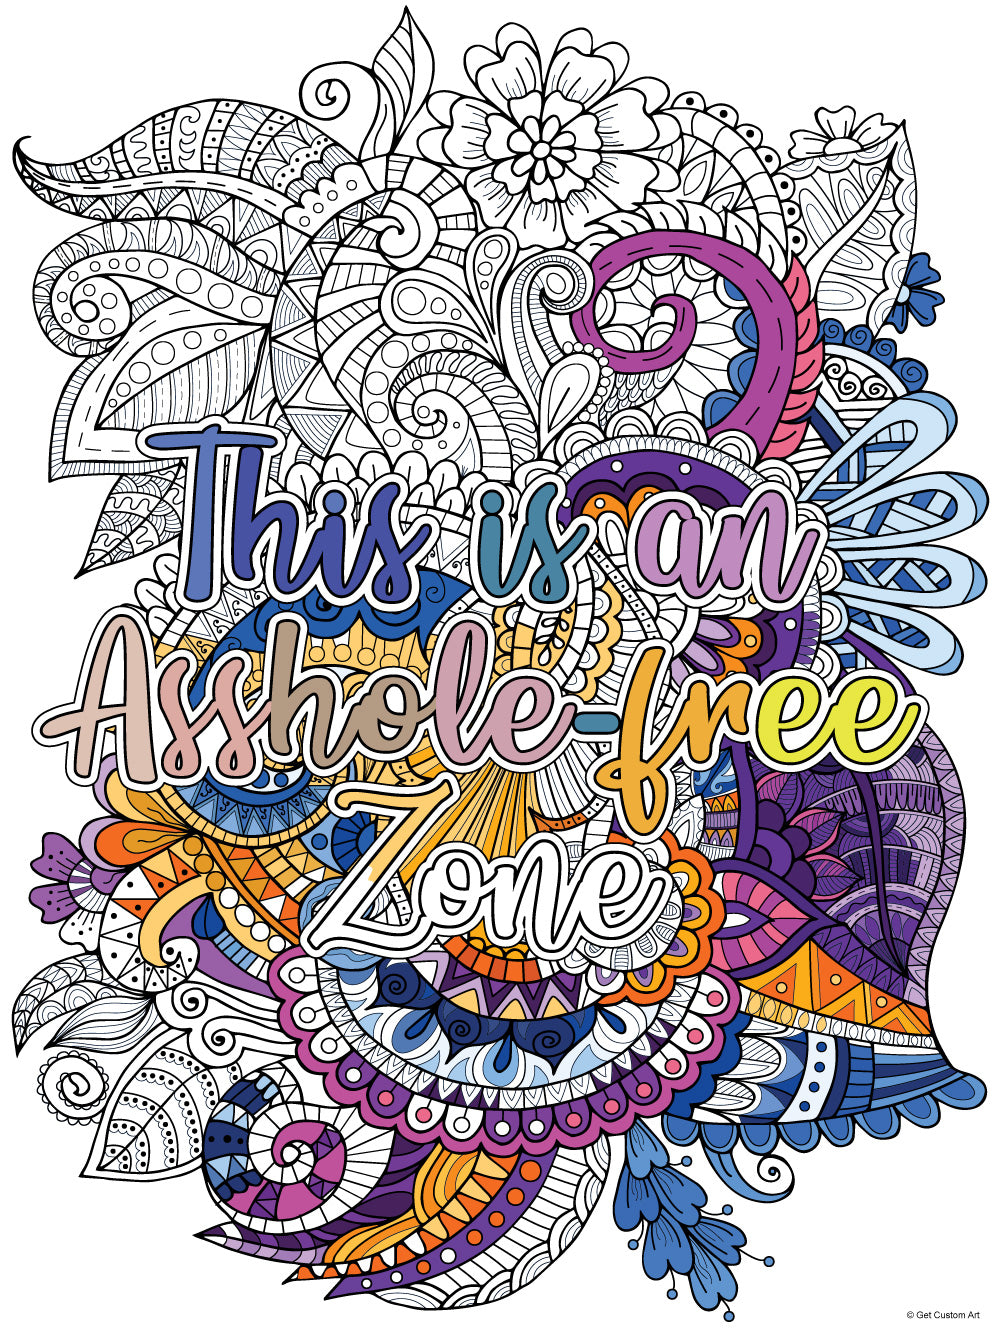 Large Funny Quote "This is an Asshole-Free Zone" Cuss Words Coloring Poster- Adult Coloring, Stress Relief, and DIY Home Decor